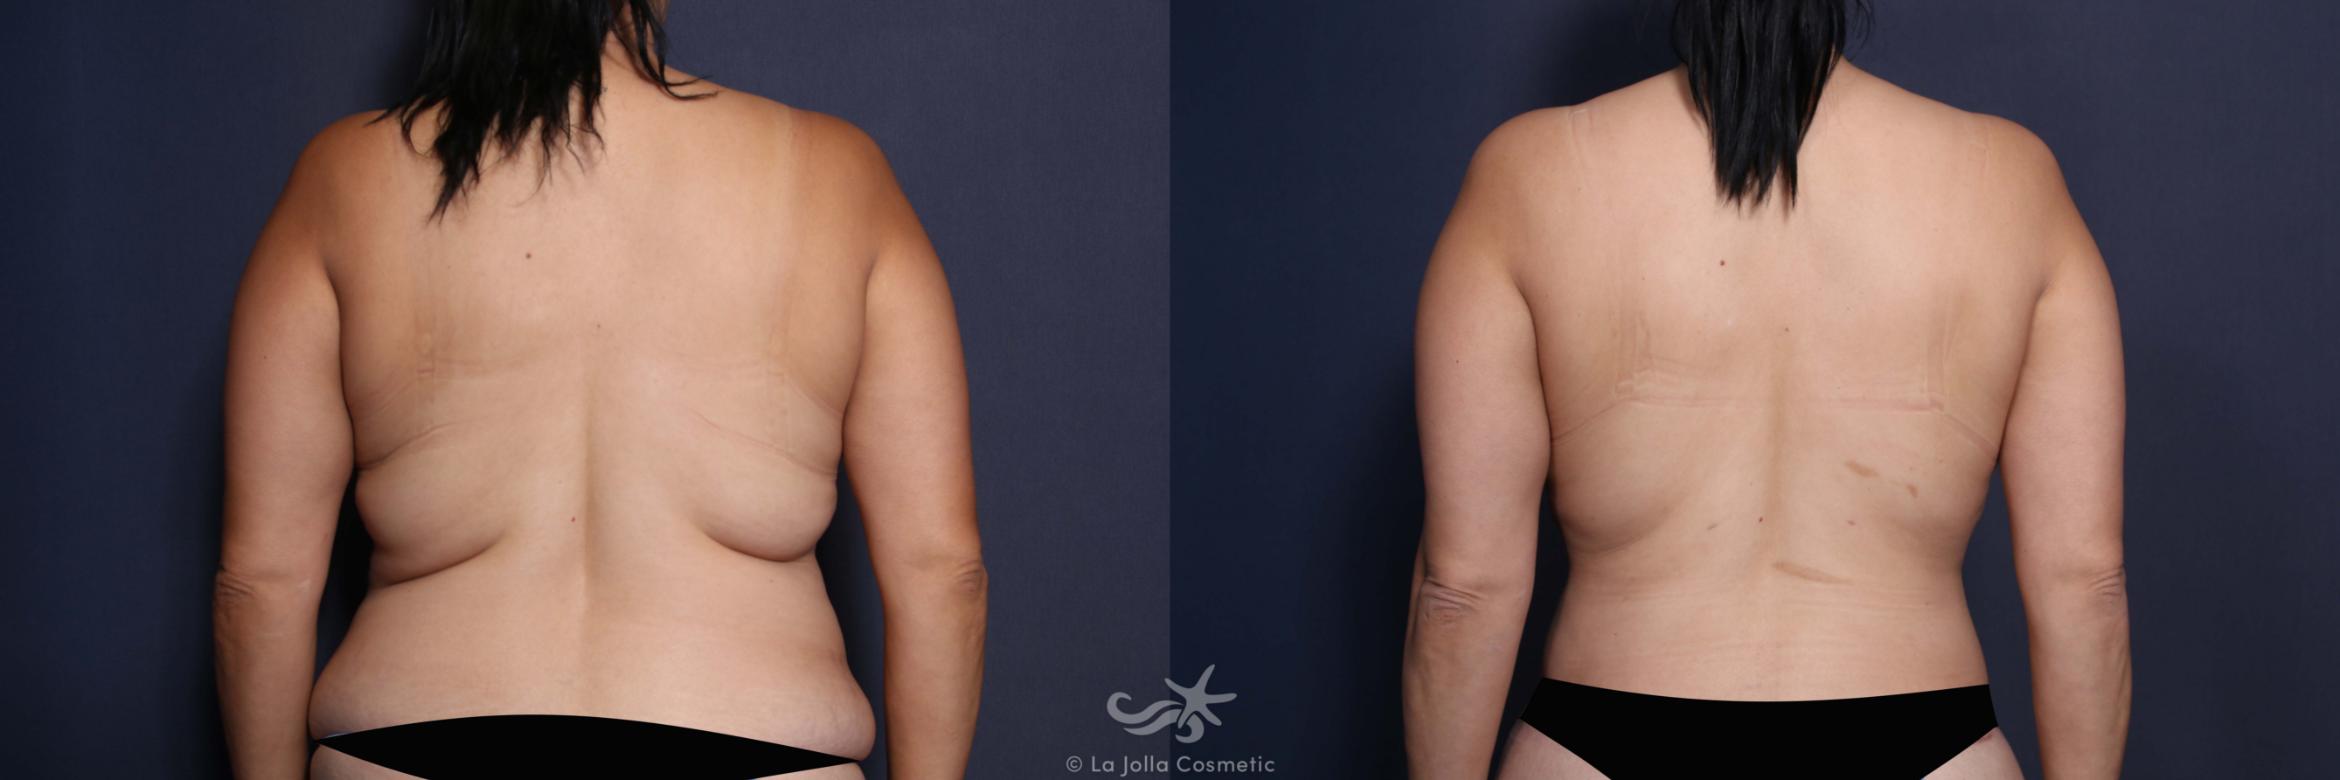 Before & After Tummy Tuck Result 574 Back View in San Diego, CA